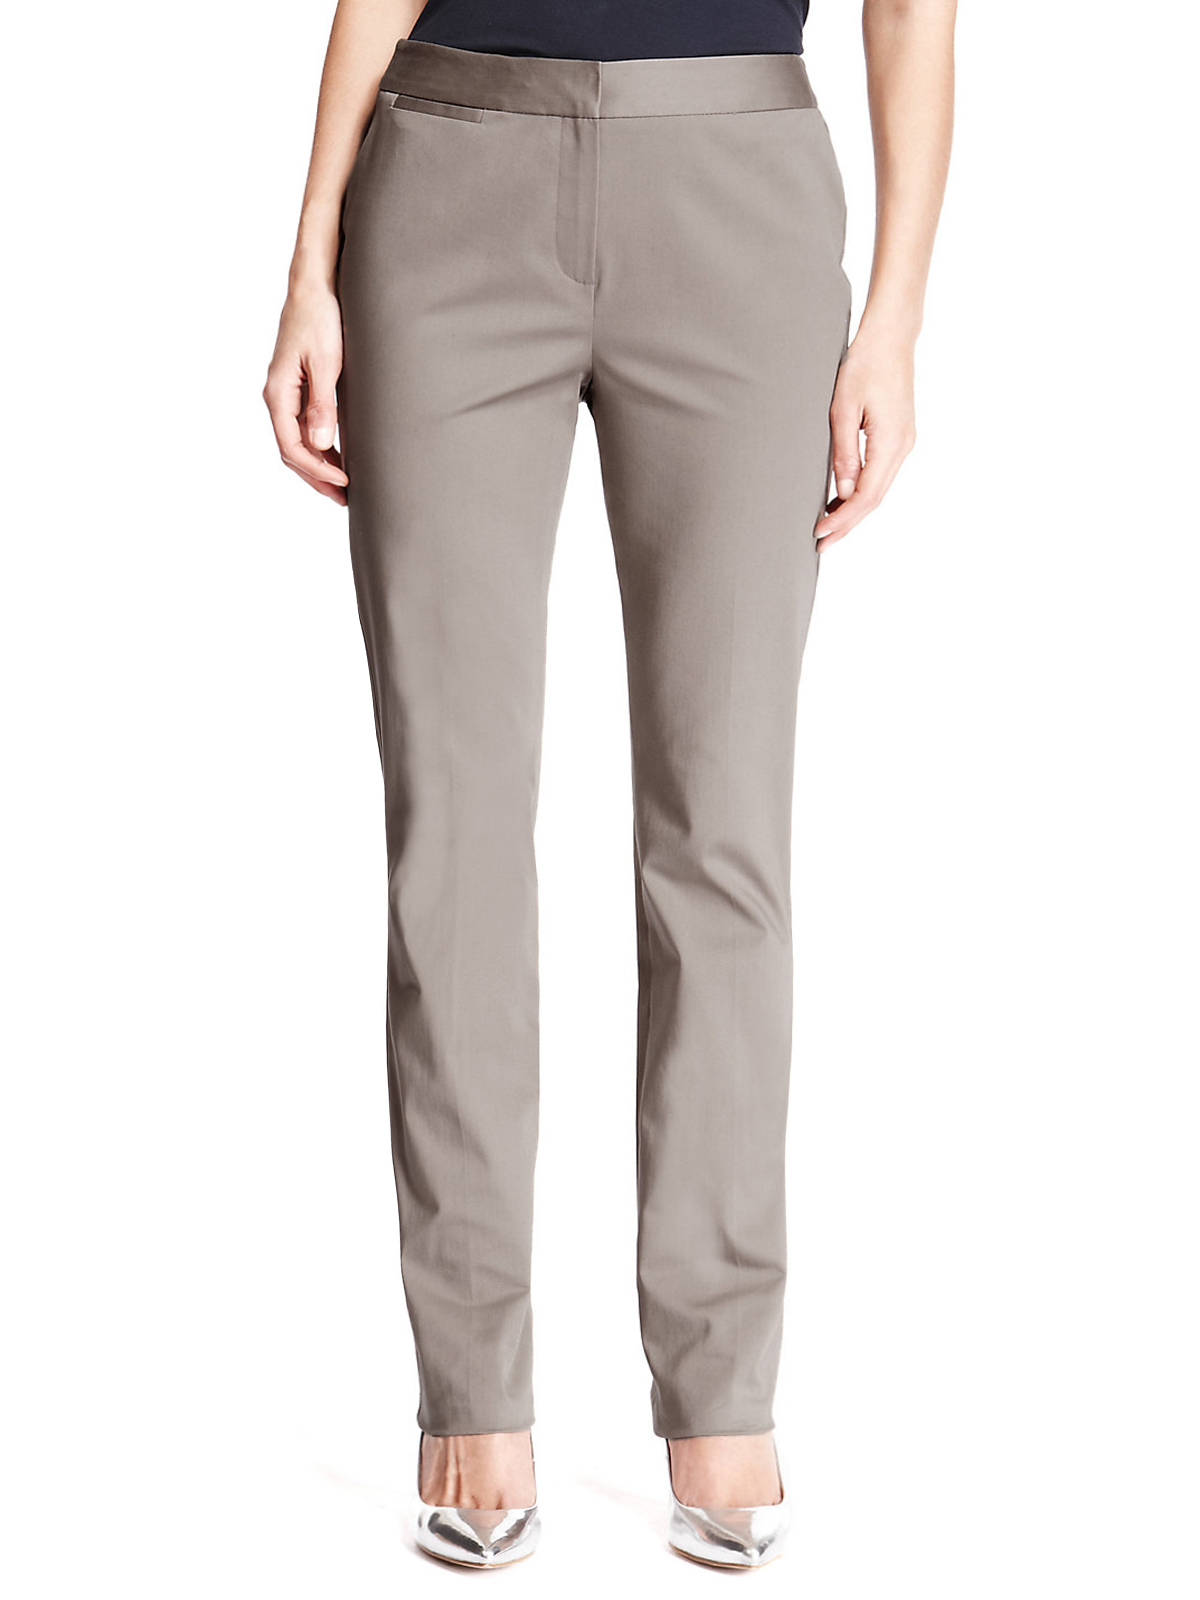 Marks and Spencer - - M&5 ASSORTED Ladies Trousers - Size 12 to 22